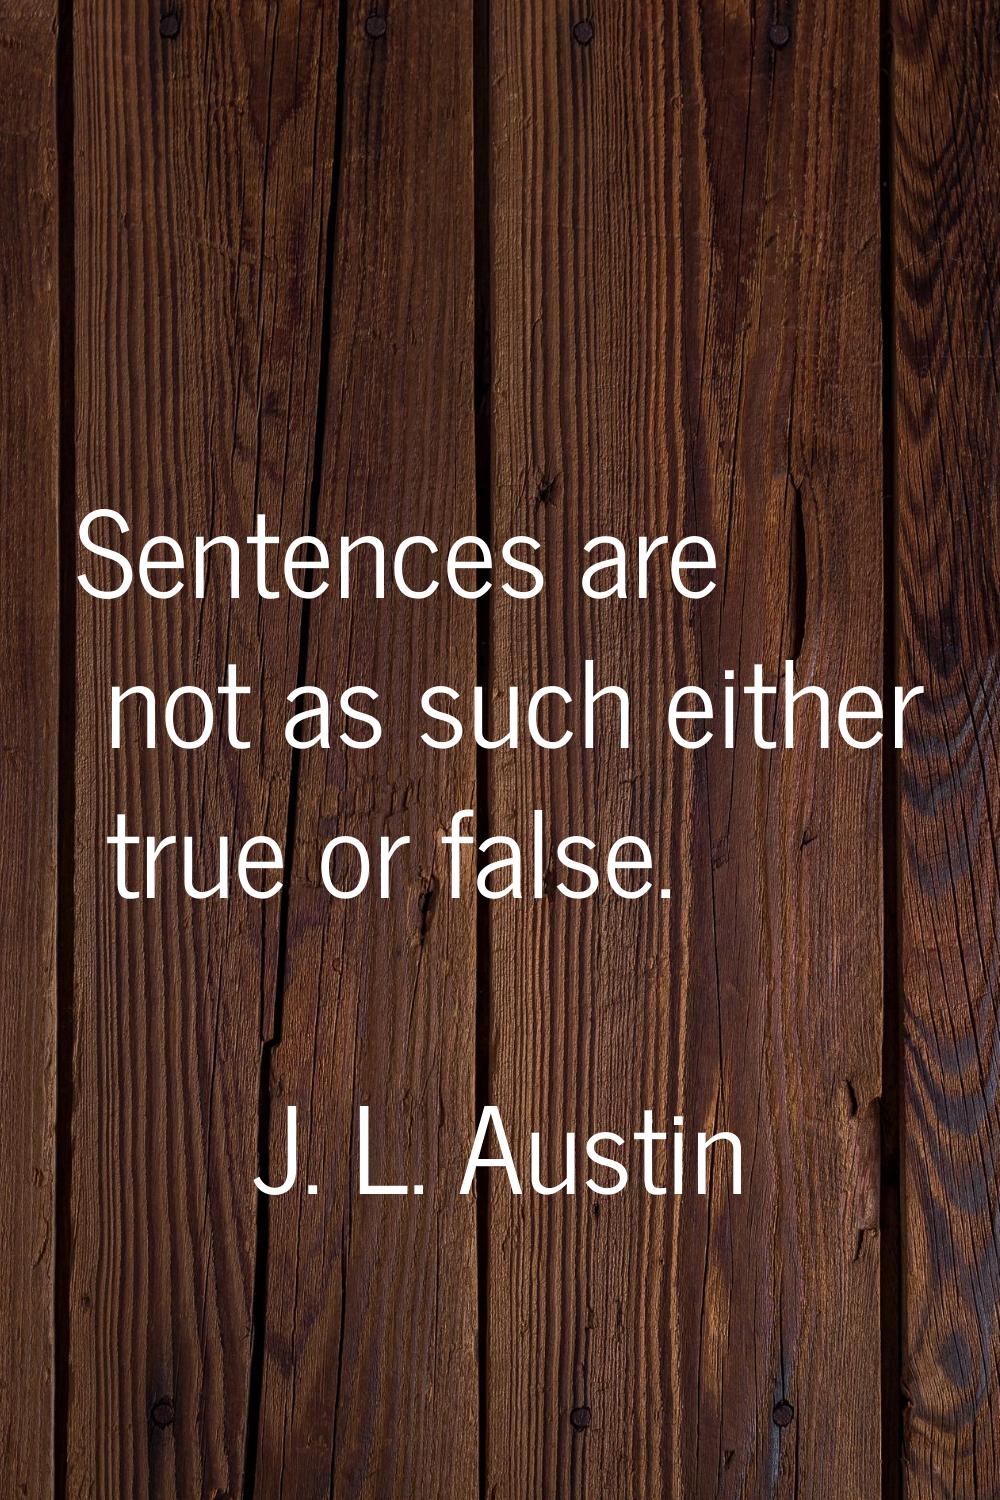 Sentences are not as such either true or false.